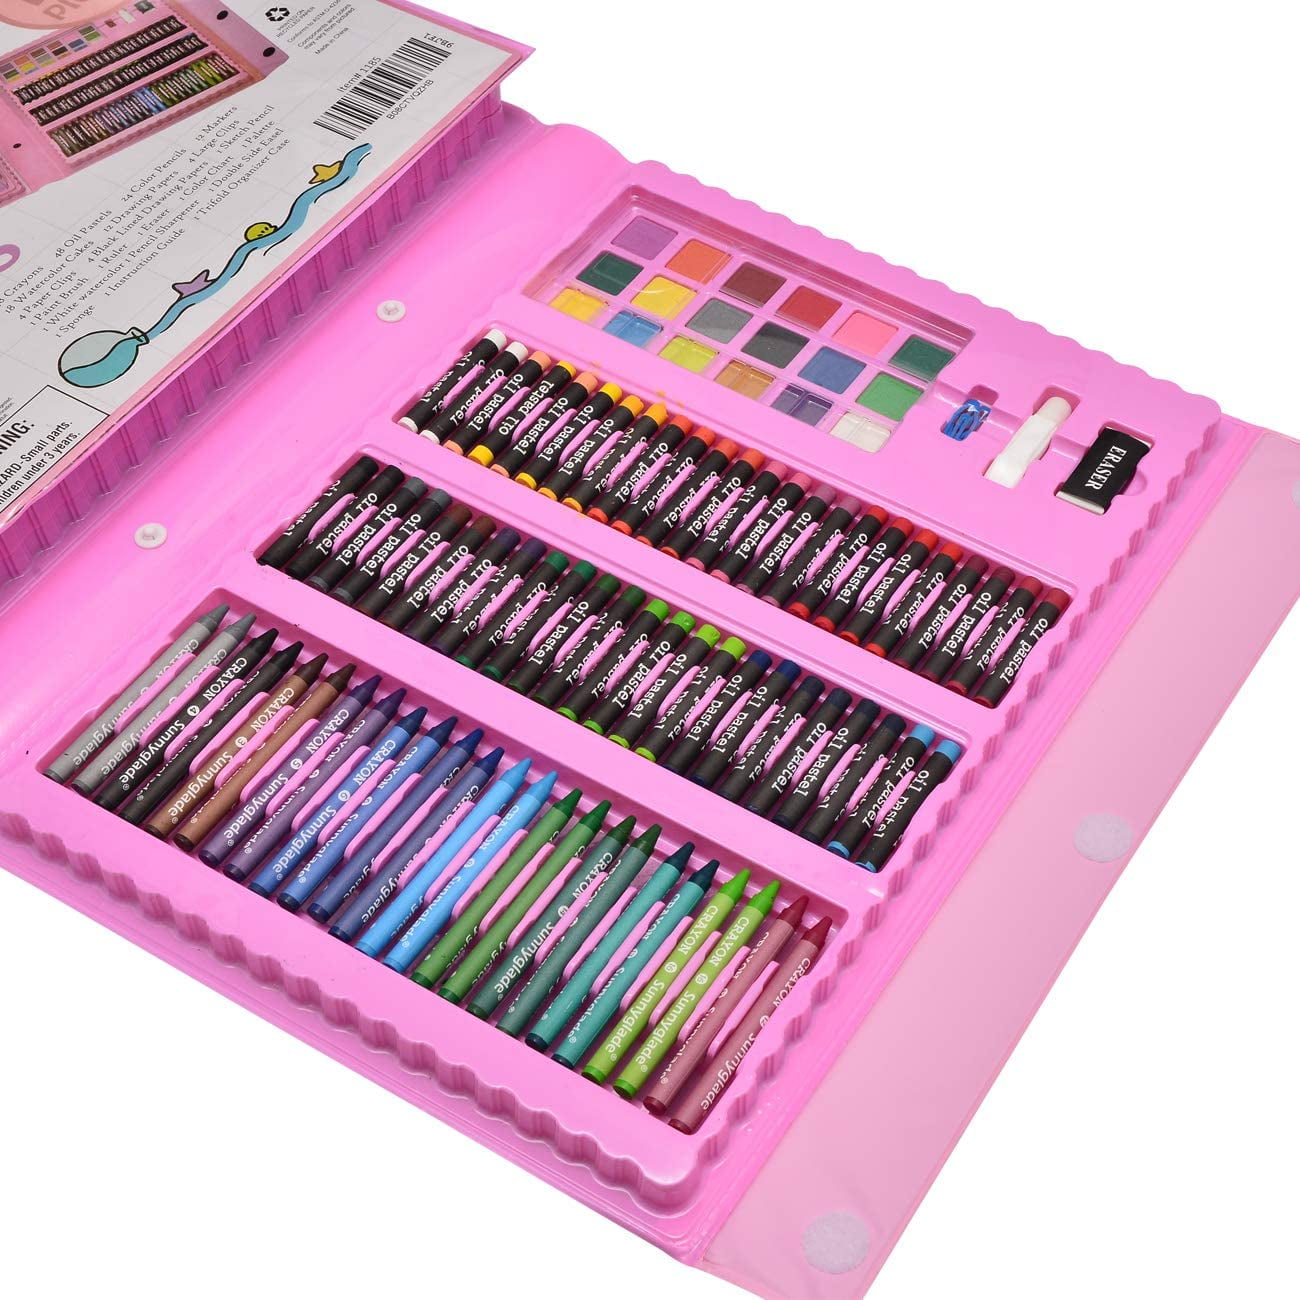 Mixed Media Art Set XXL with Professional Wooden Case (150 Pieces) - Art  Supplies for Painting, Drawing, and Coloring - Pastels, Acrylic,  Watercolor, Crayons, Pencils - 4 Drawing Pads - Zenacolor : :  Home